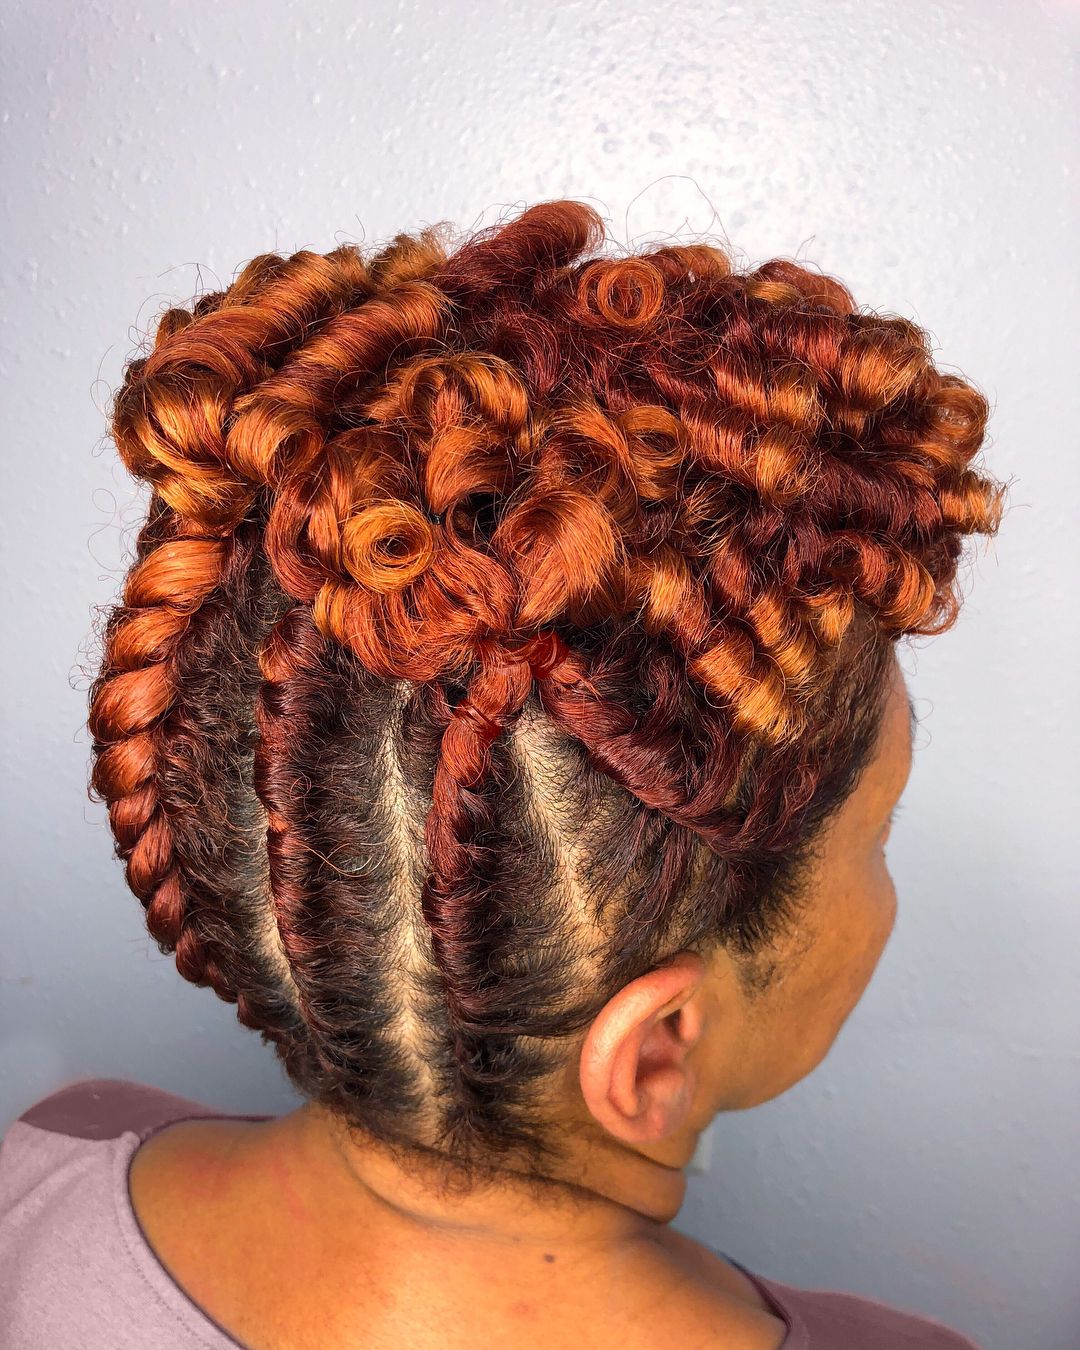 braided hairstyle with curls on top